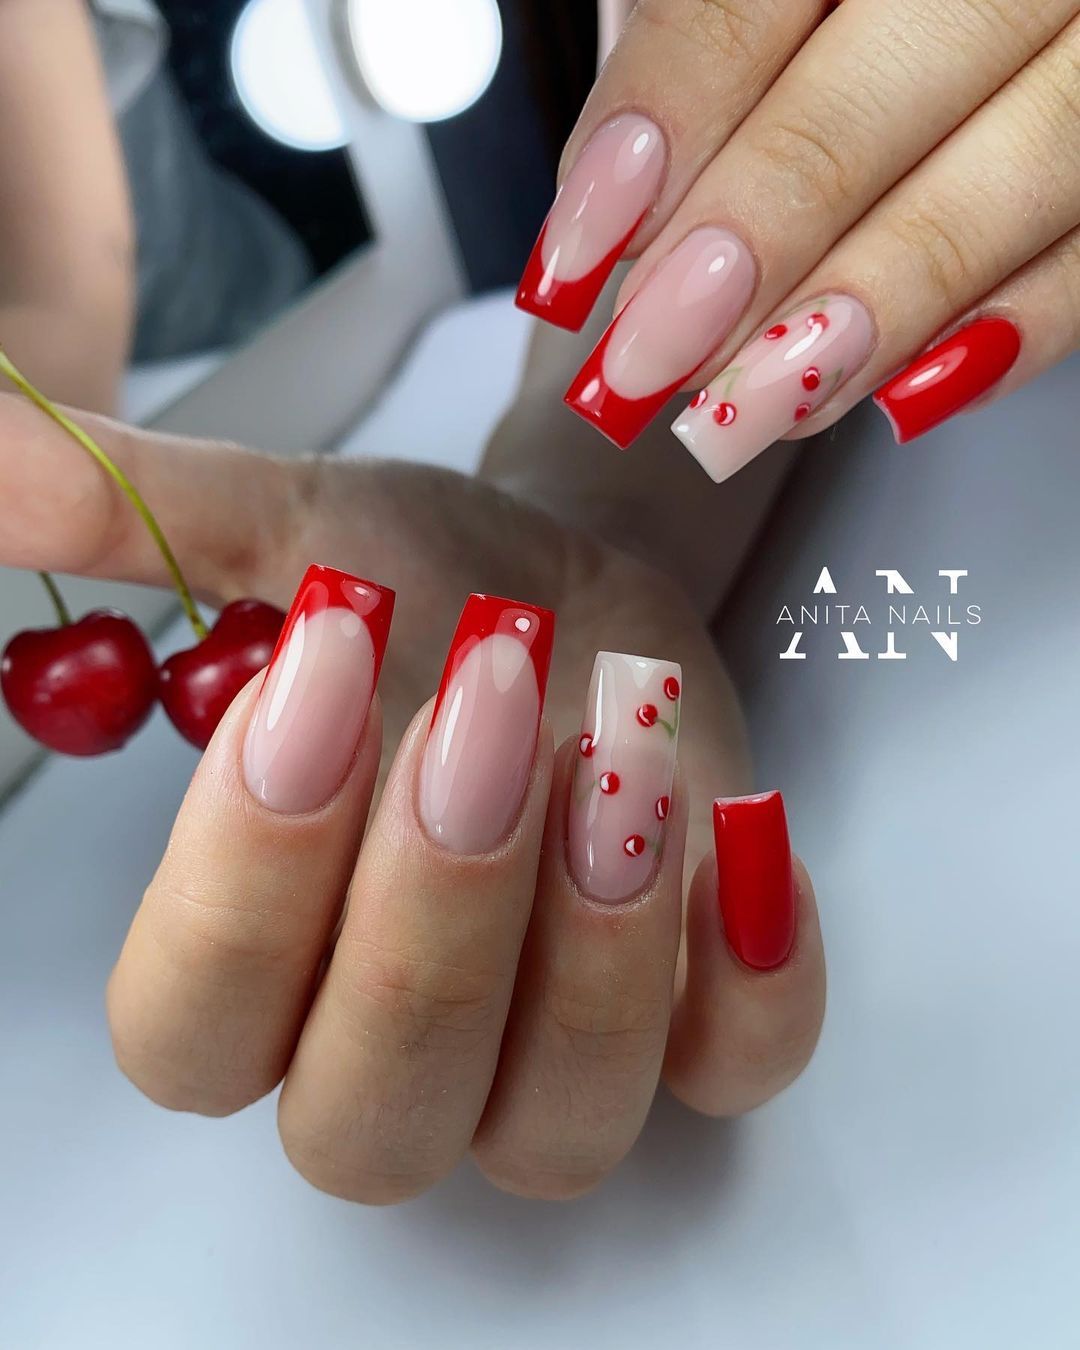 Long Nails with Red Tips and Cherry Design